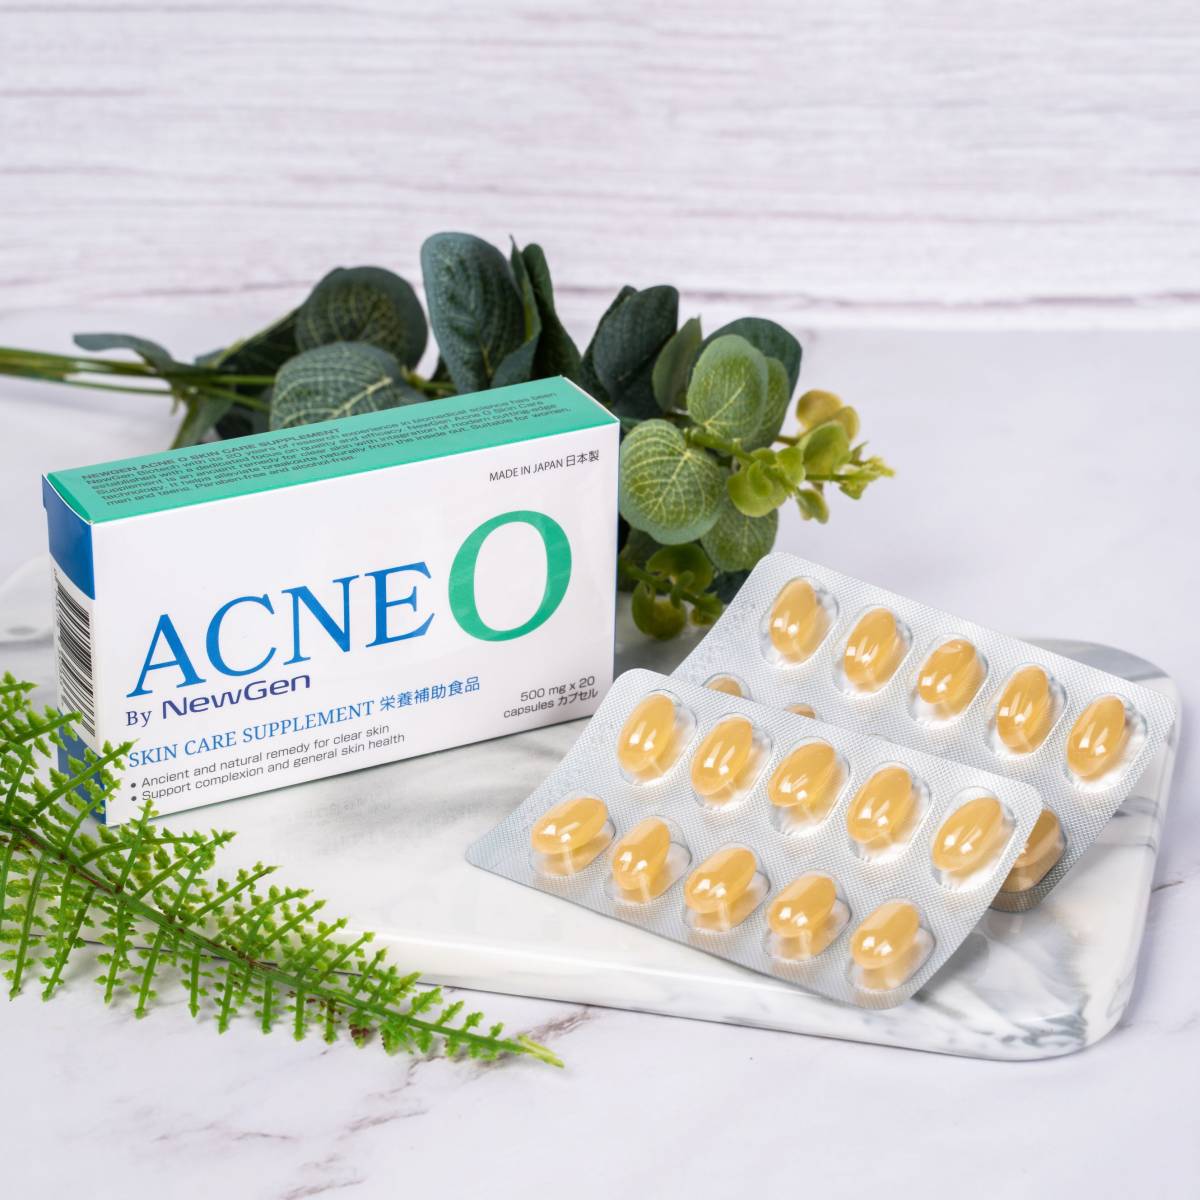 ACNE O Skin Care Supplement